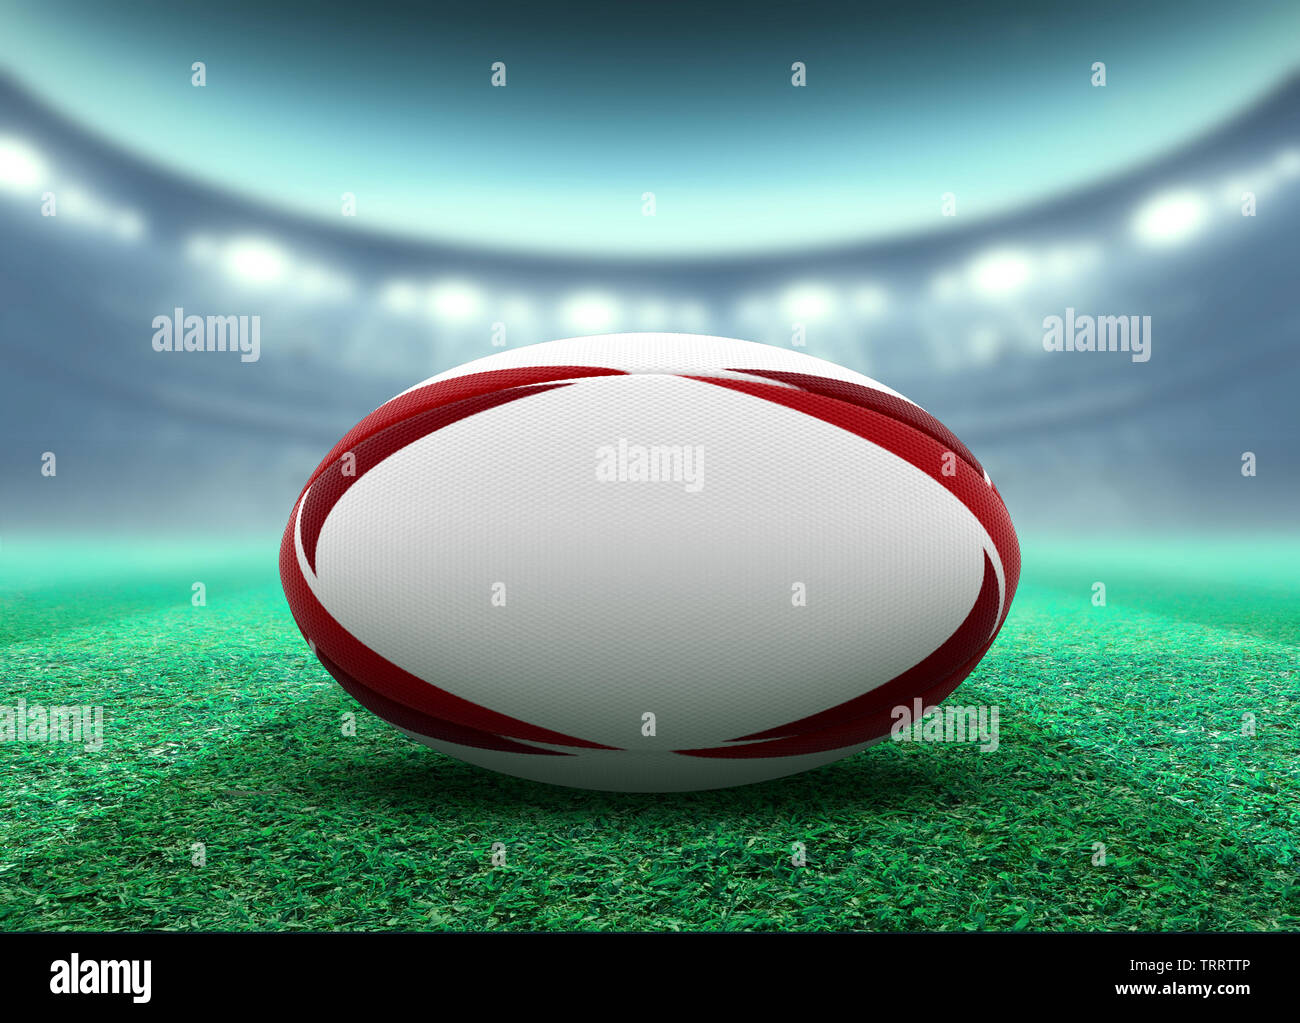 A reguar white rugby ball with red and blue design elements resting on a  stadium grass pitch at night under illuminated floodlights - 3D render  Stock Photo - Alamy